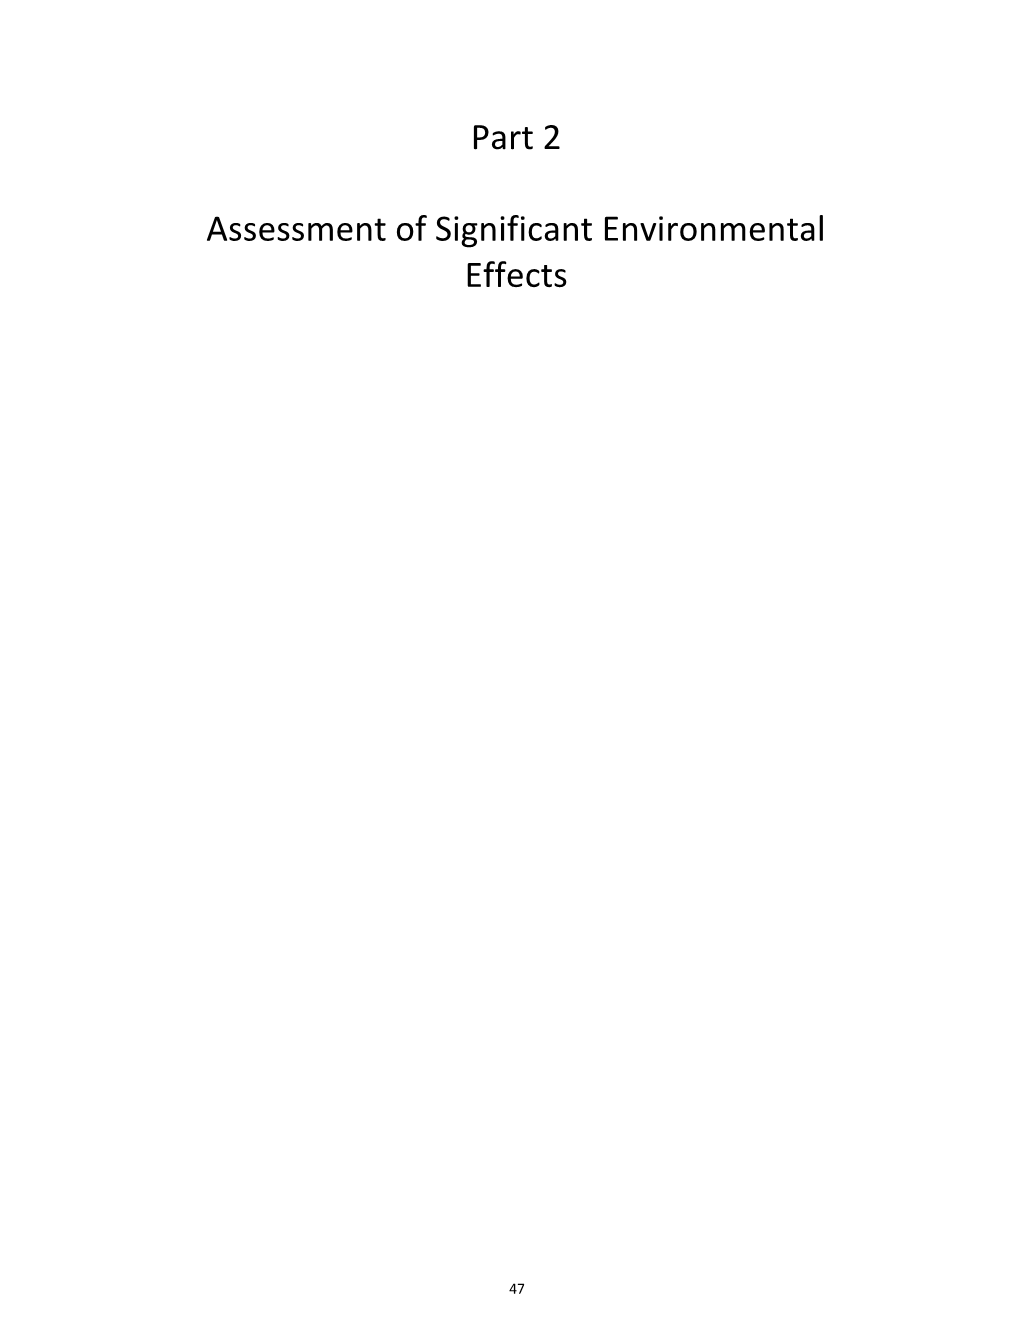 Part 2 Assessment of Significant Environmental Effects